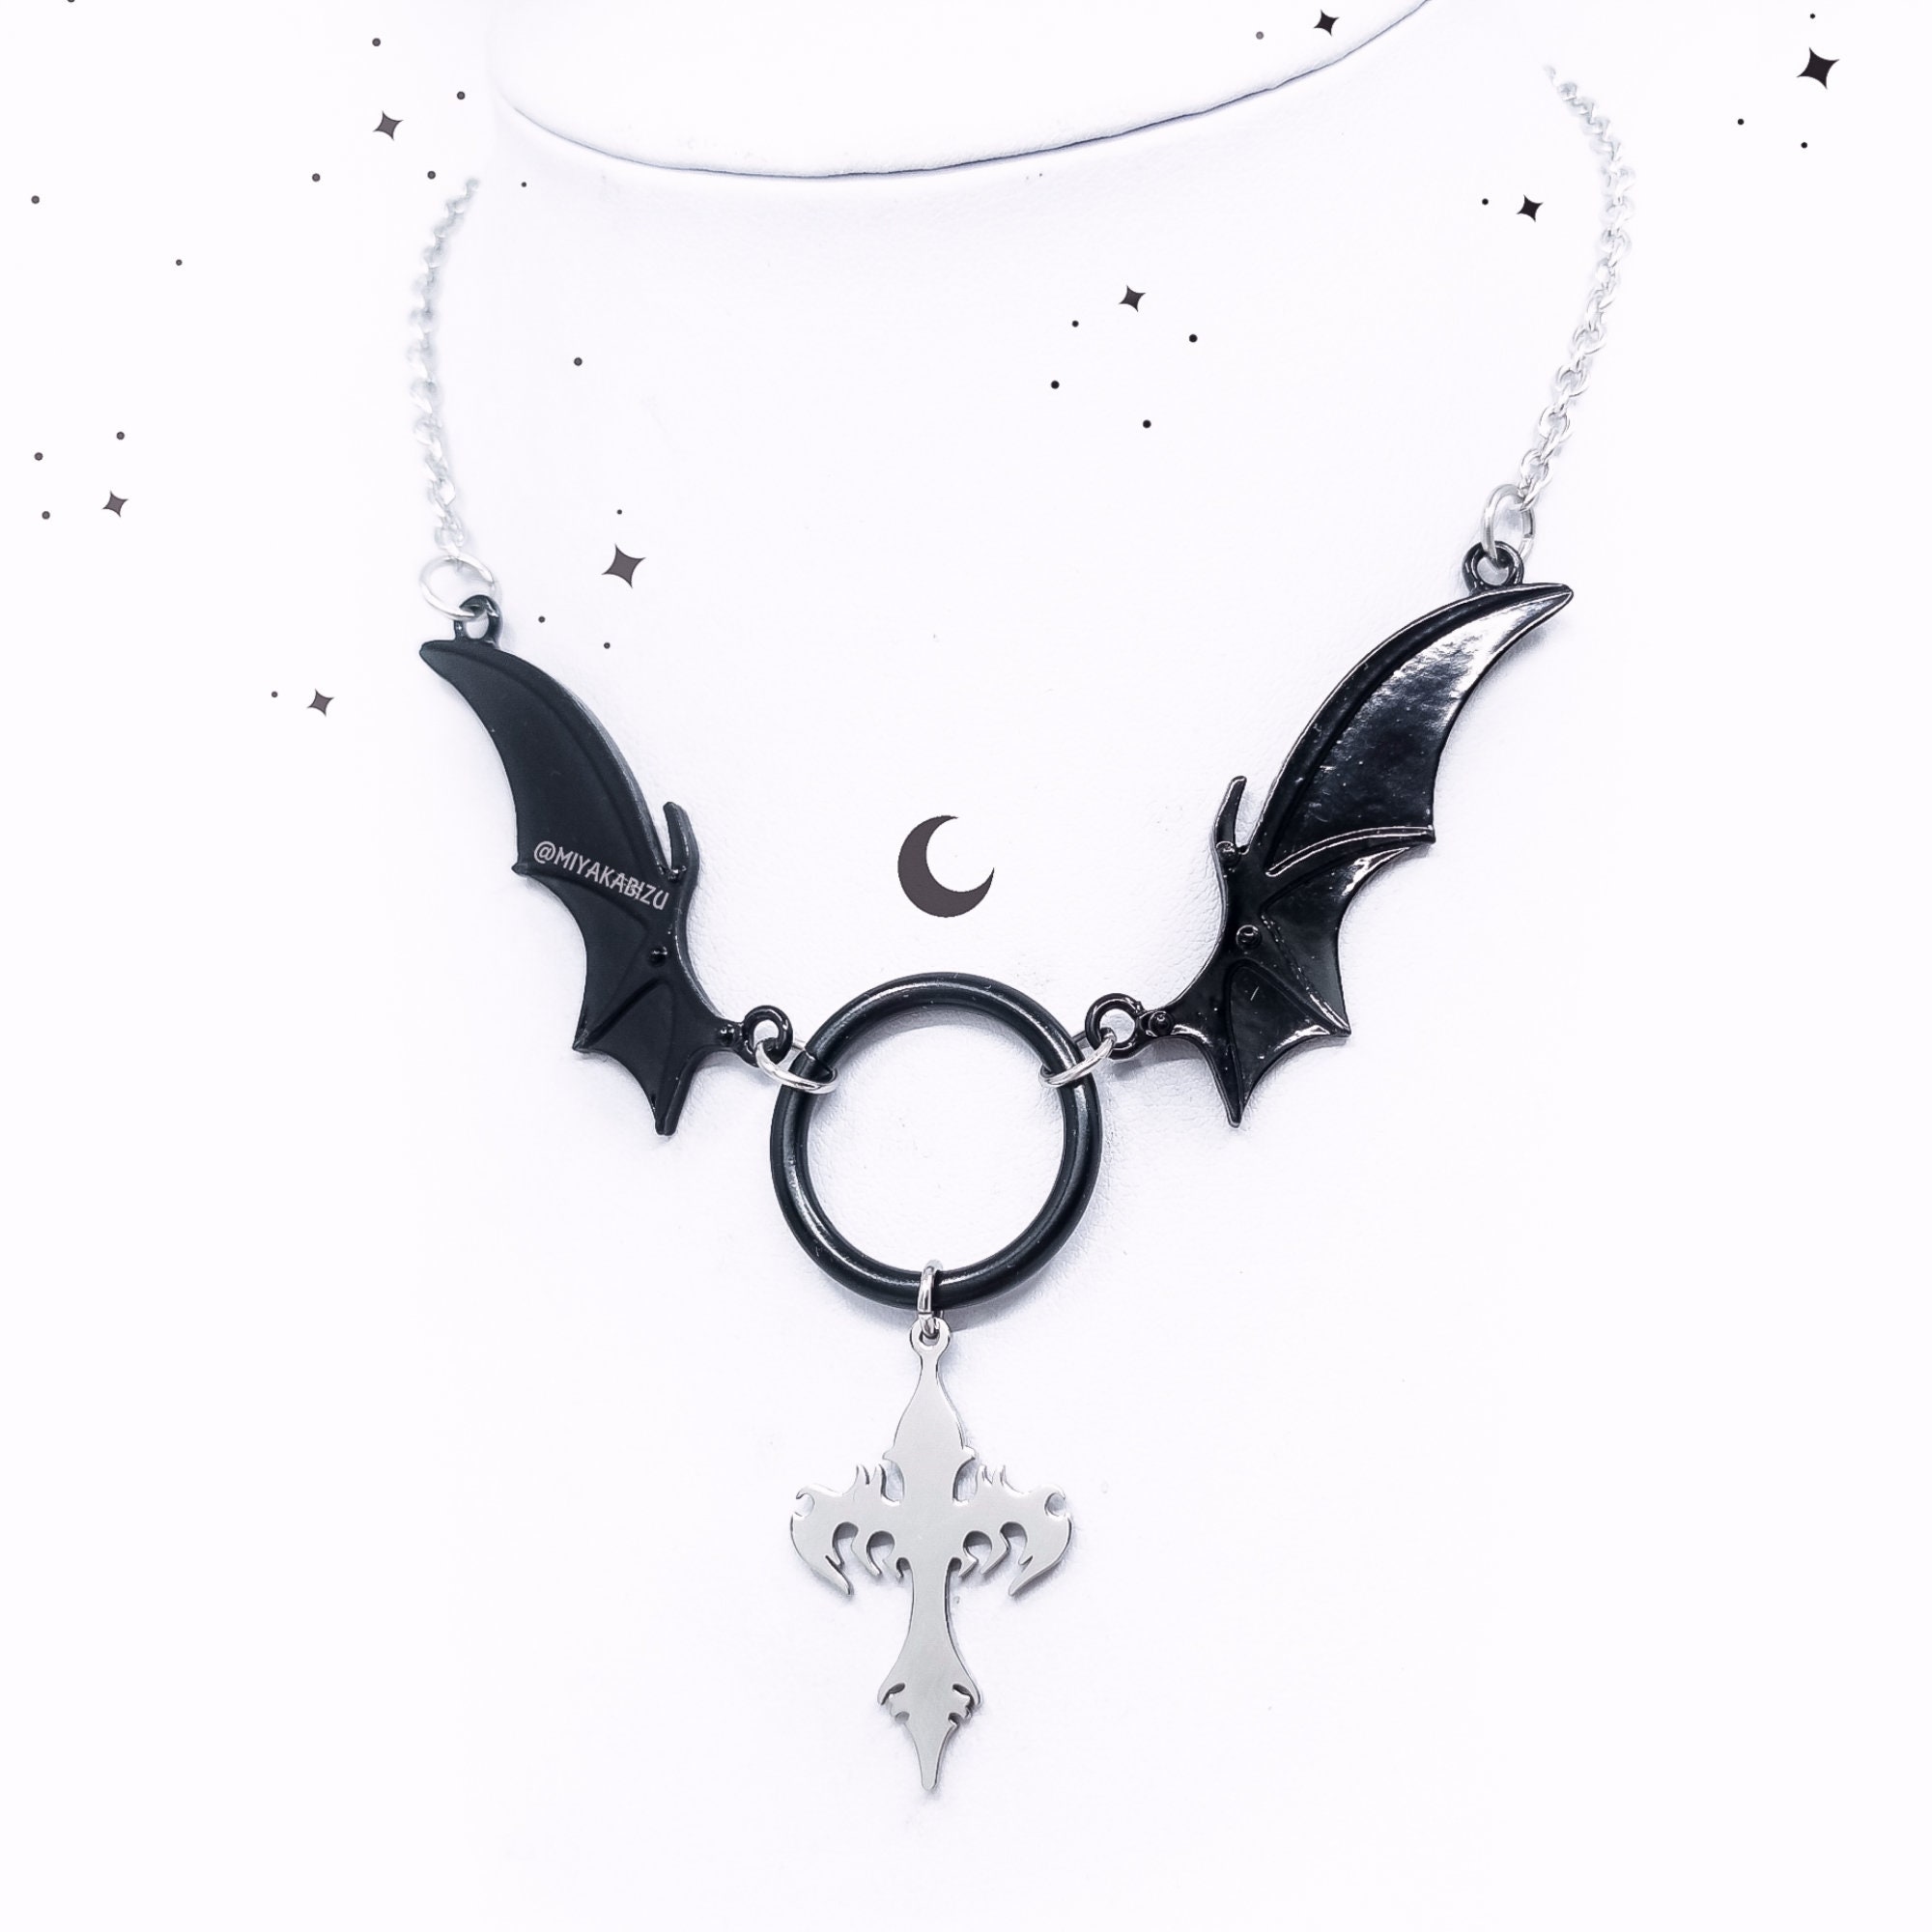 CROSS With Black BAT WINGS Necklace Silver Rainbow Charm - Etsy